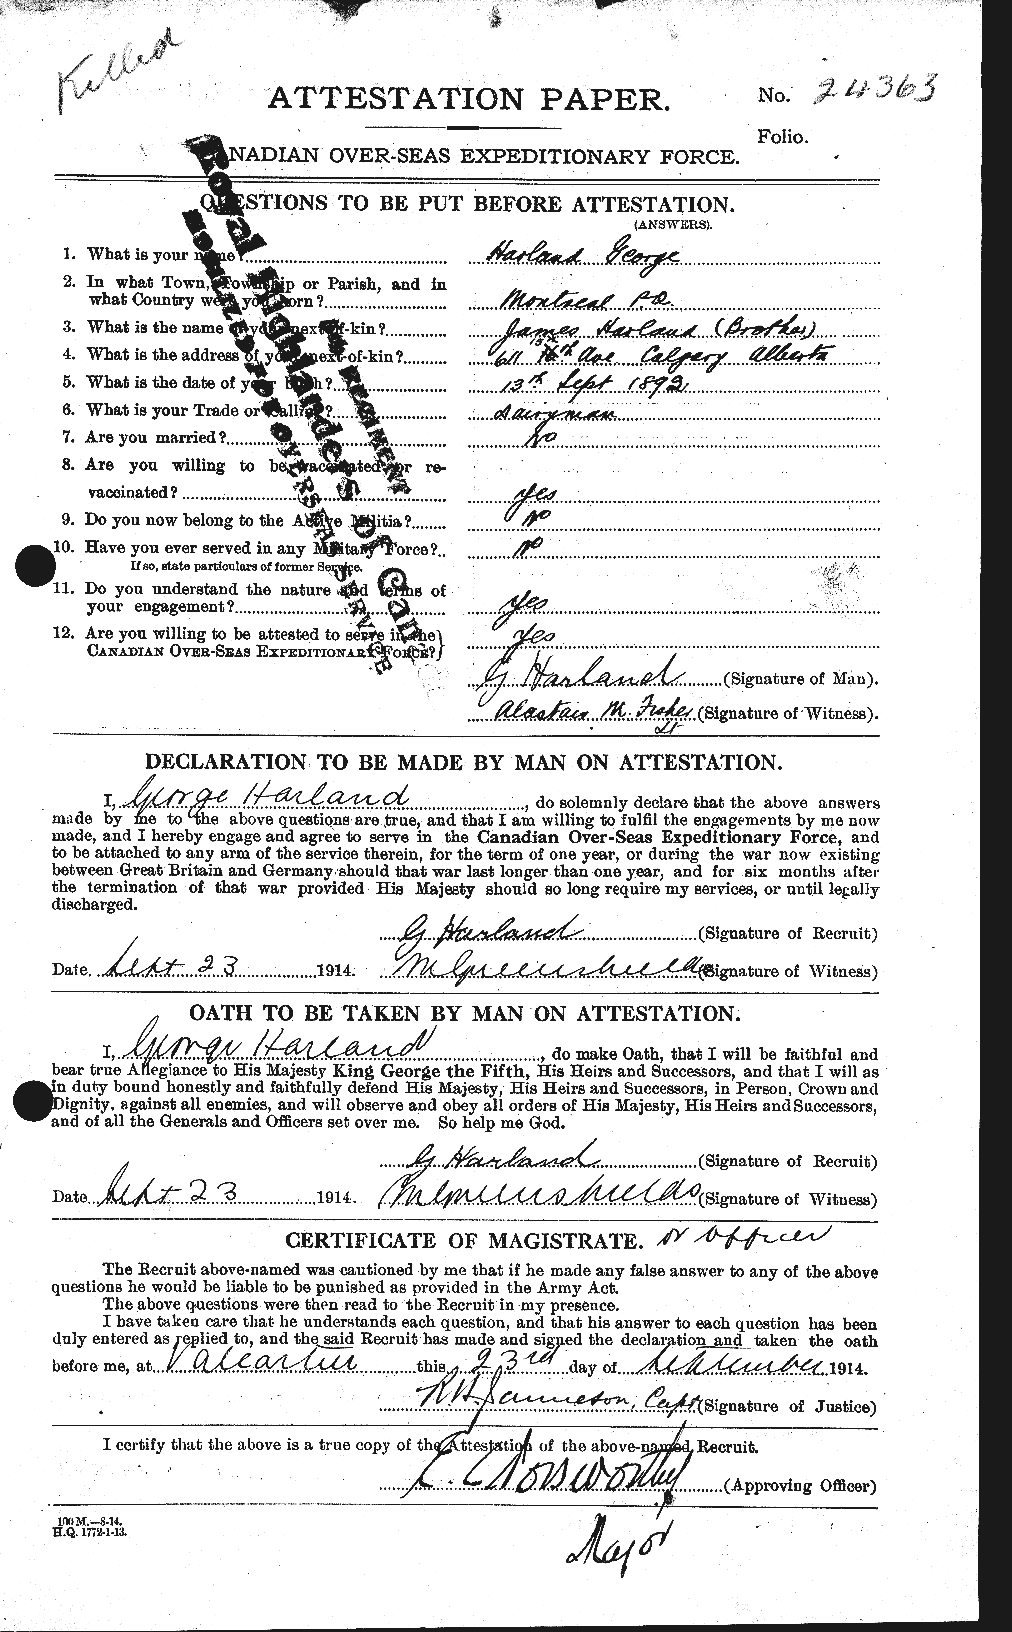 Personnel Records of the First World War - CEF 376685a